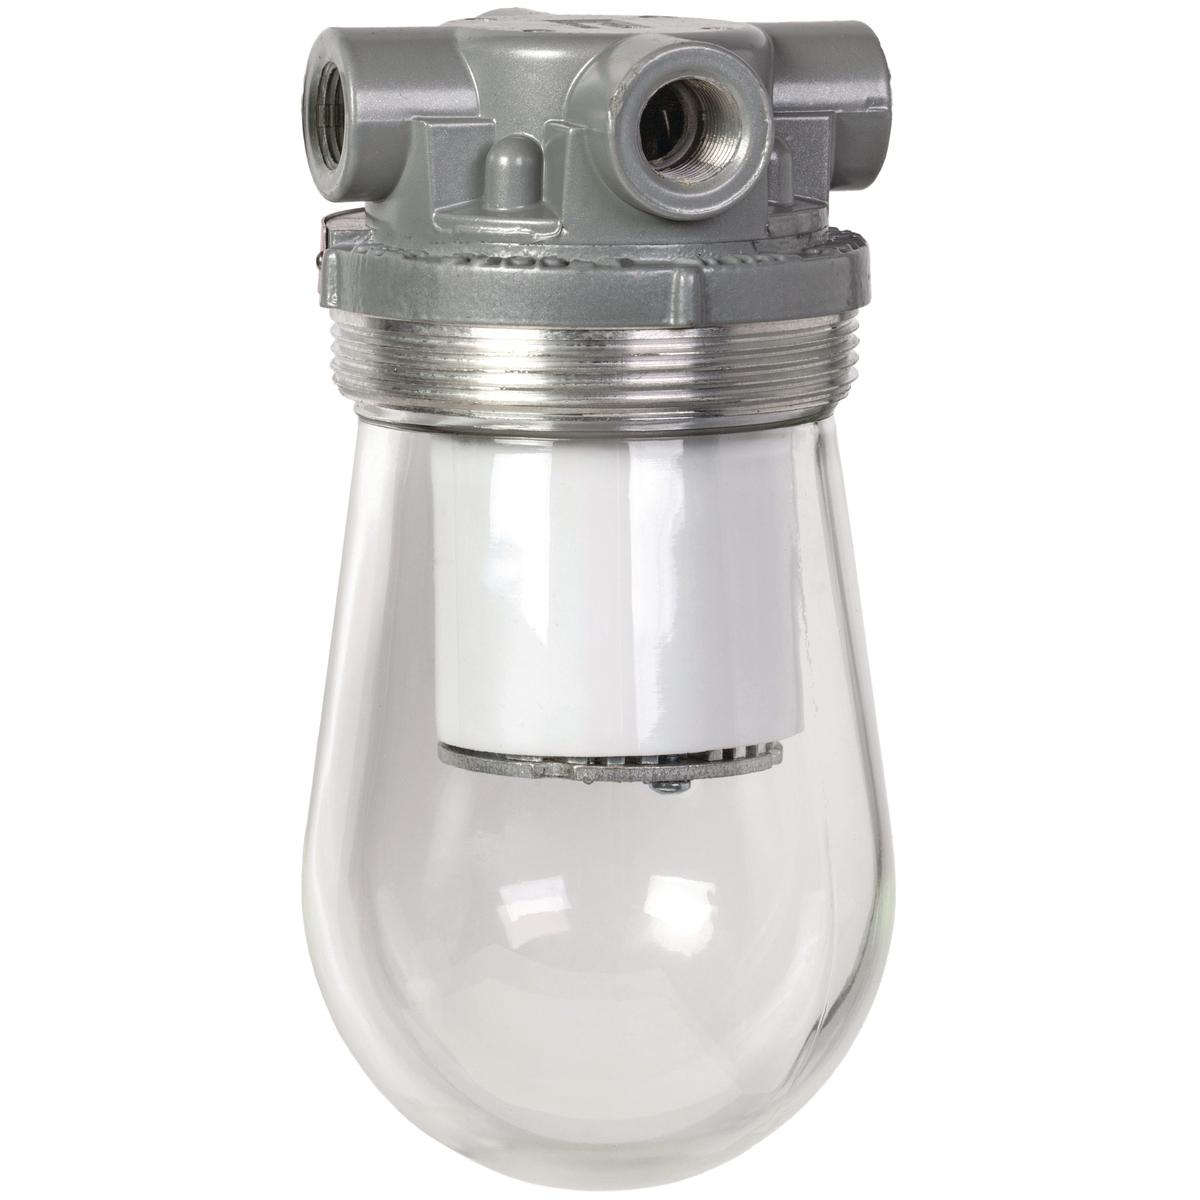 Hubbell DVL1330X1G The DVL Series is a Dust Tight/ Utility fixture using energy efficient LED's. This fixture is made with a cast copper-free aluminum housing and mount that is  suitable for harsh and hazardous environments. With the design of this fixtures internal heat si